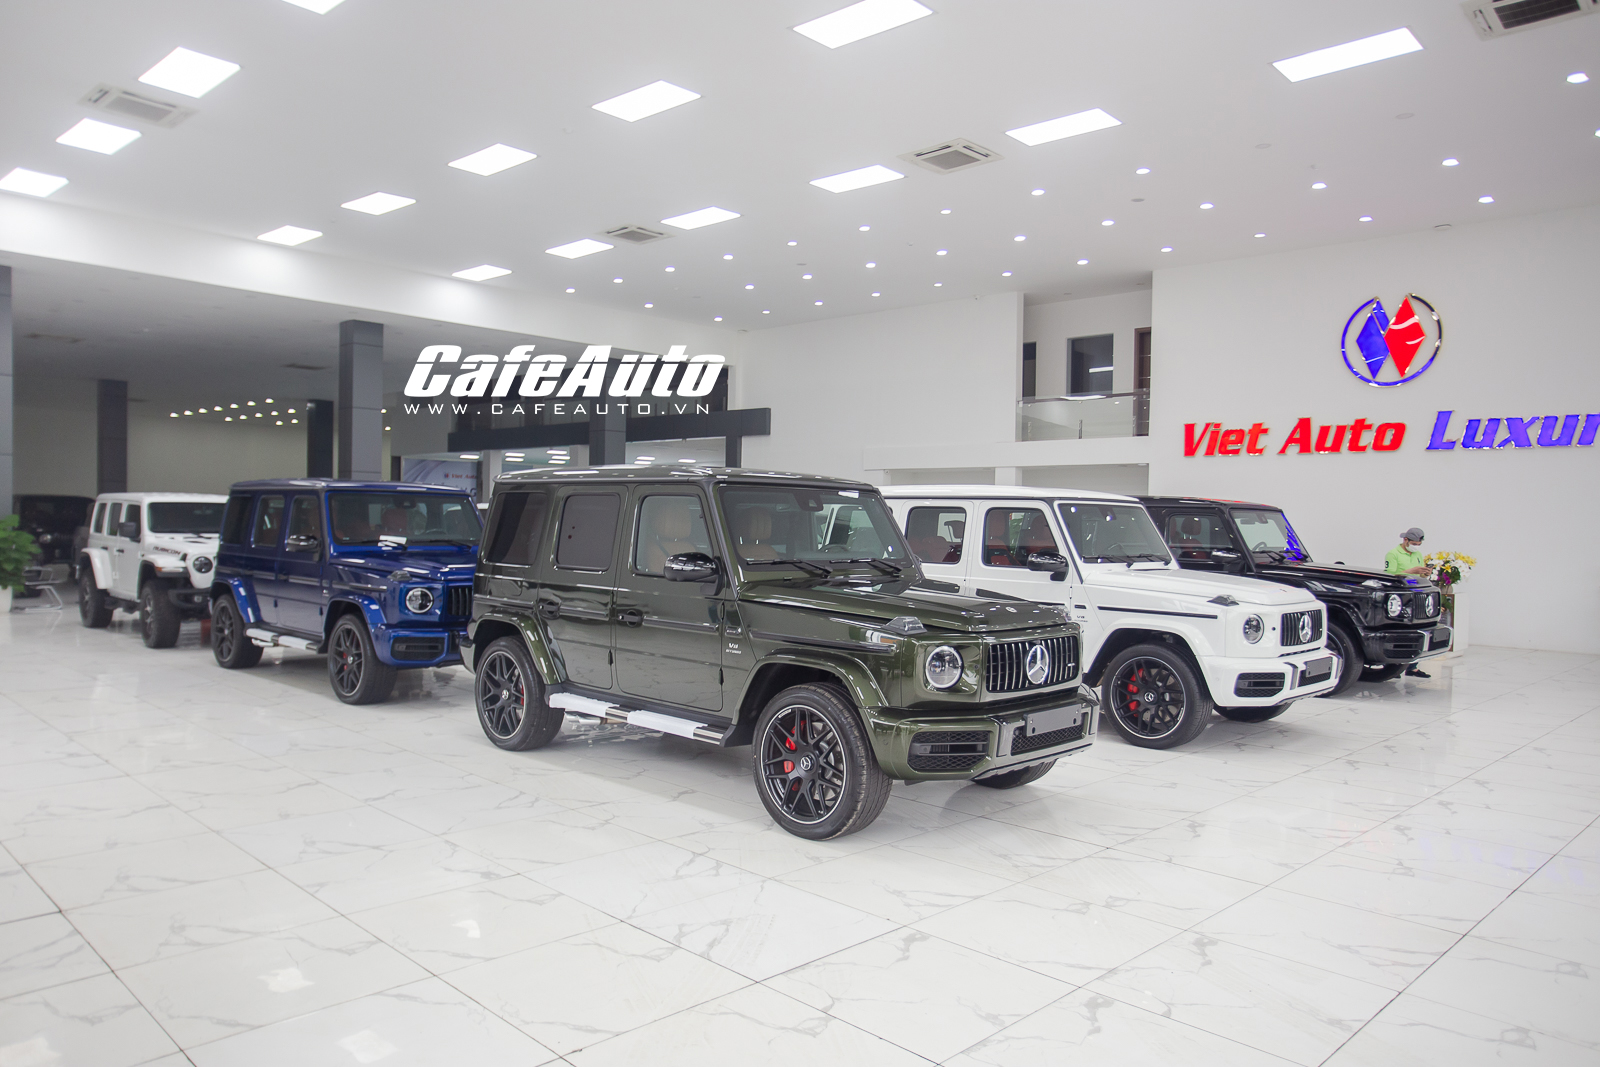 mercedes-amg-g-63-phan-phoi-chinh-hang-cafeautovn-19